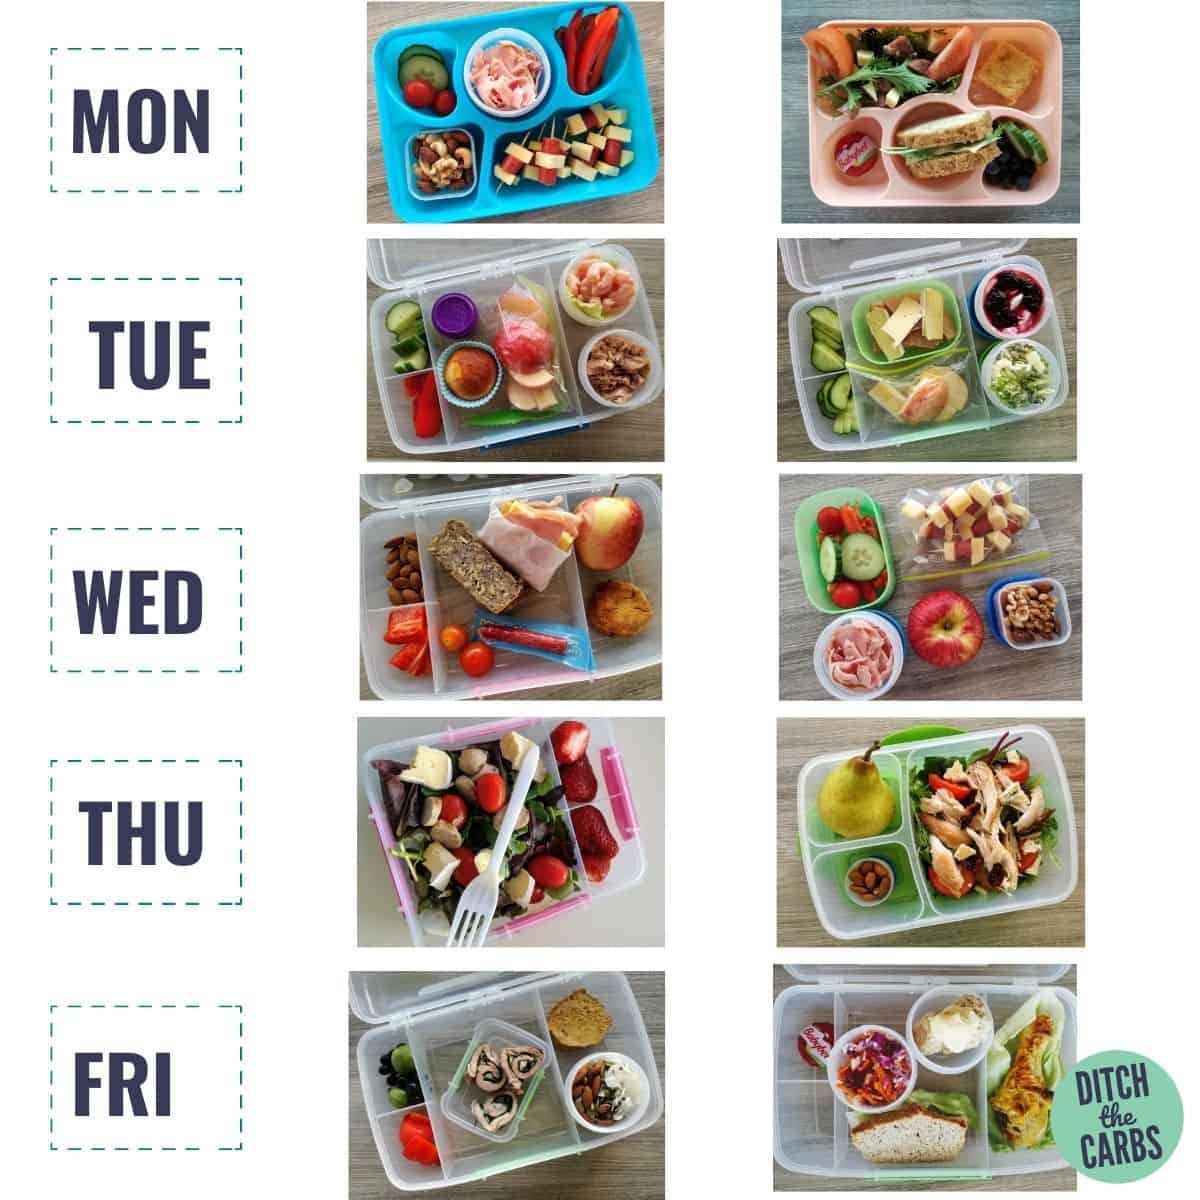 https://thinlicious.com/wp-content/uploads/2019/10/2-weeks-low-carb-lunch-boxes-1200-%C3%97-1200-px.jpg